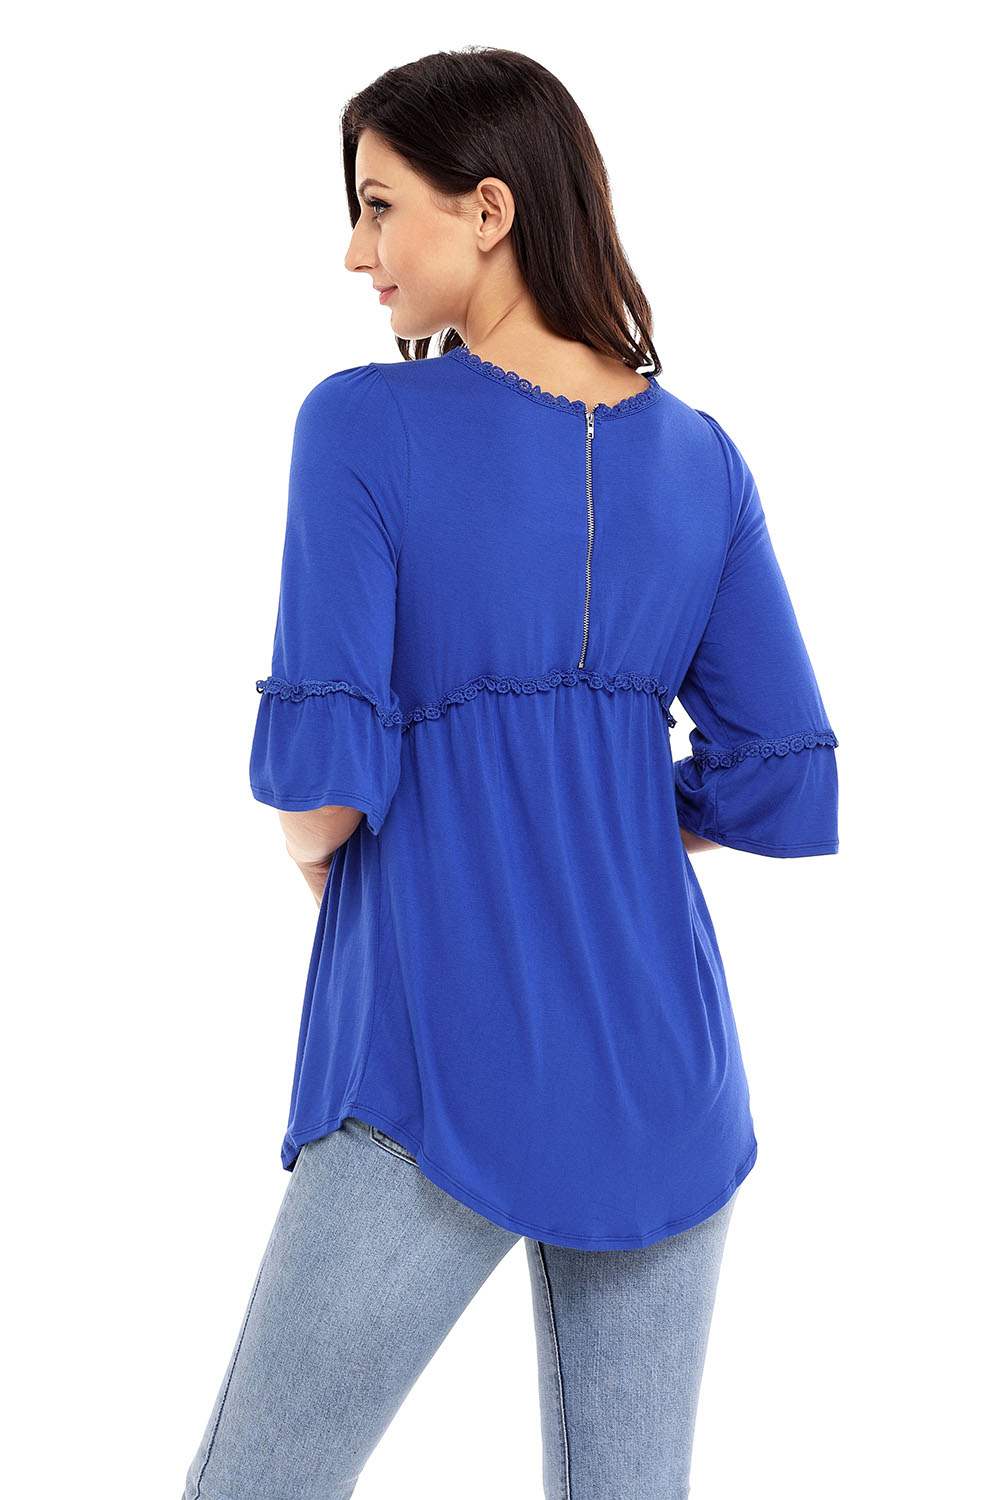 BY250232-5 Blue Babydoll Long Tunic Top